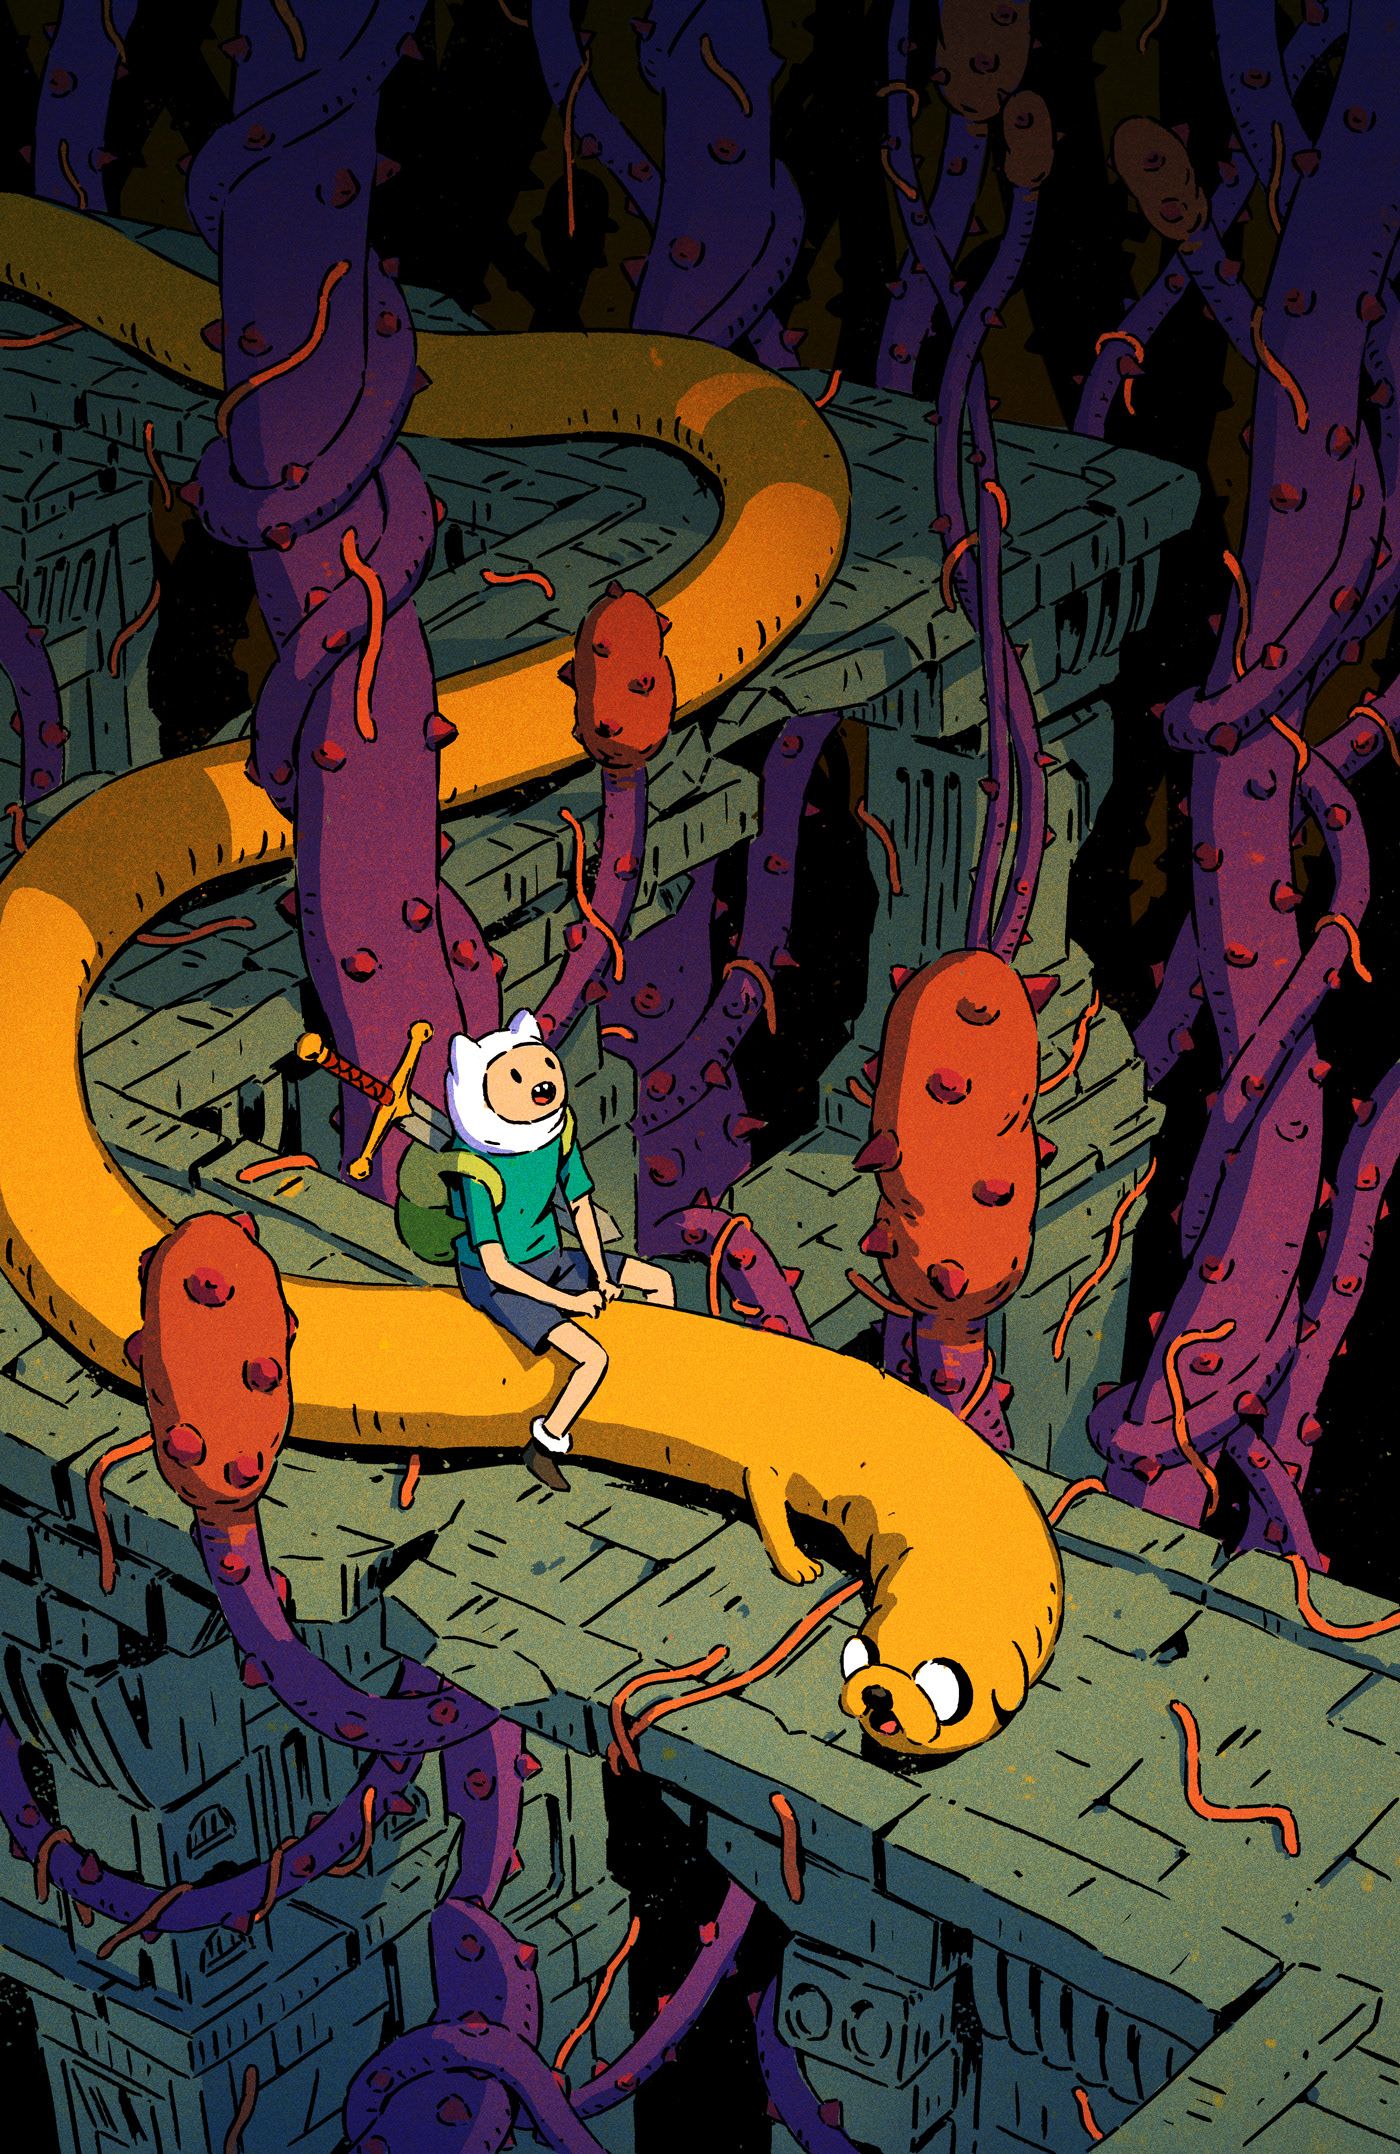 Adventure Time #60 cover by John Erskine. - Adventure Time